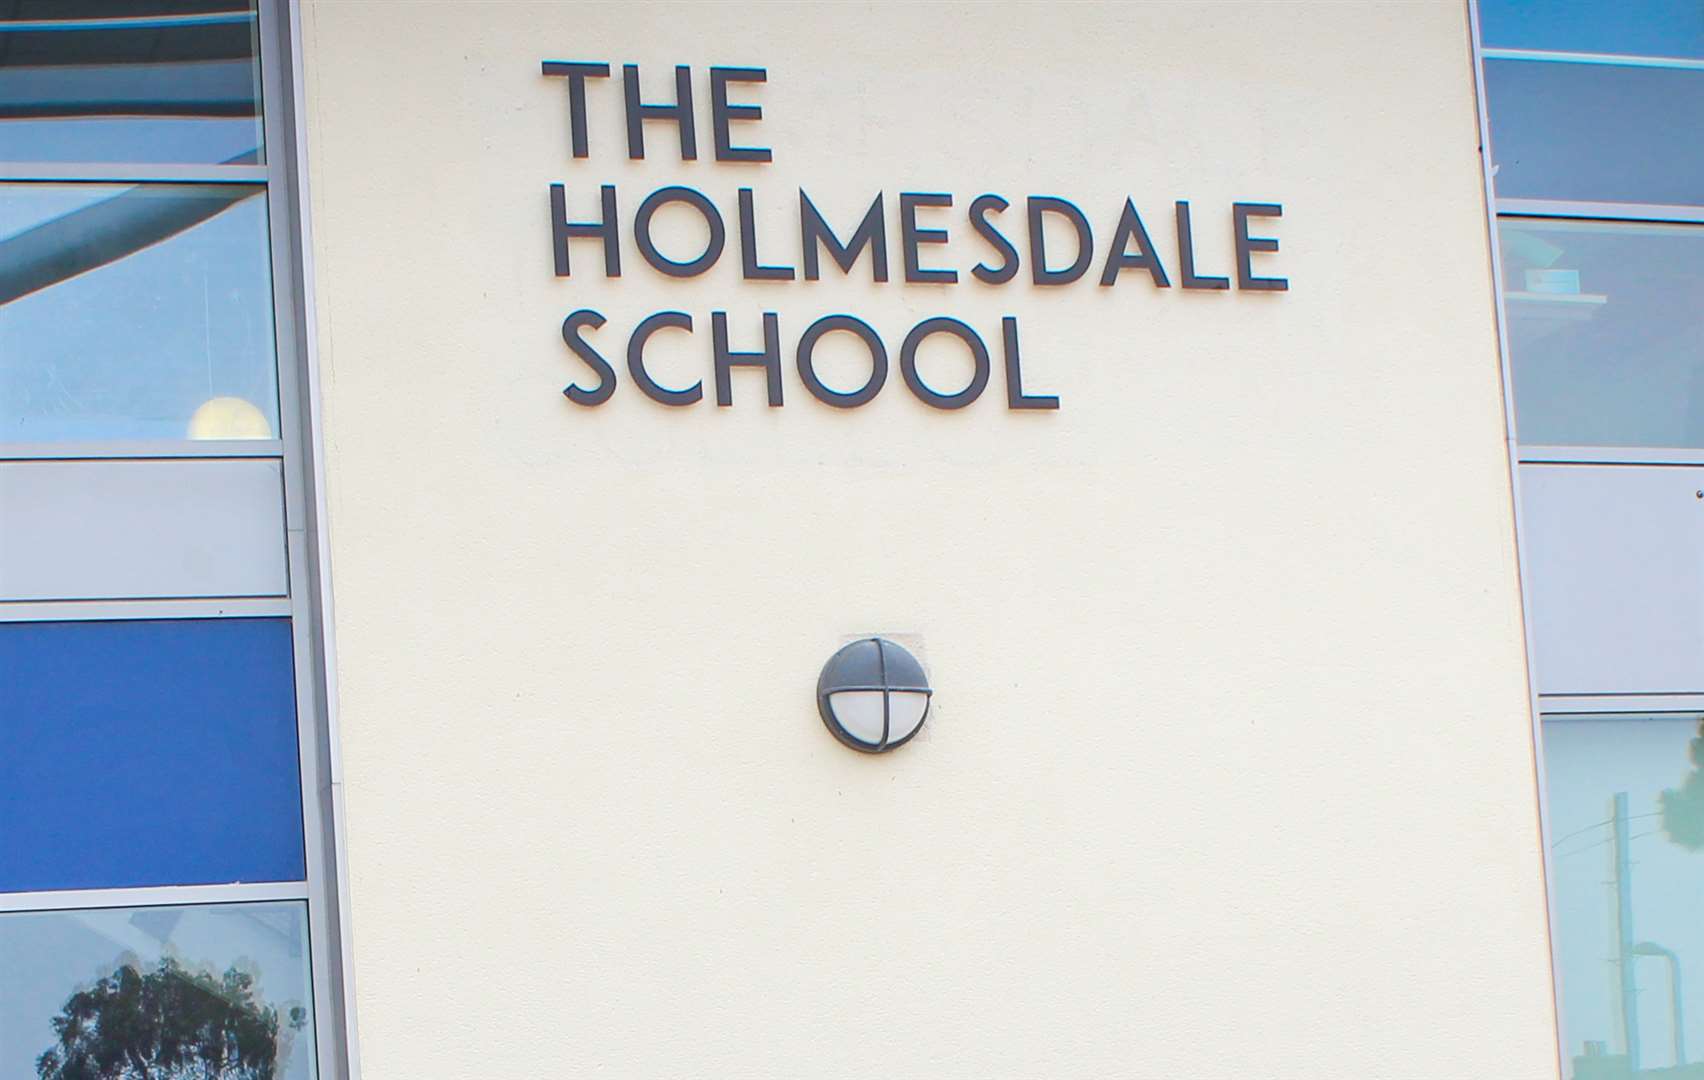 The Holmesdale School.